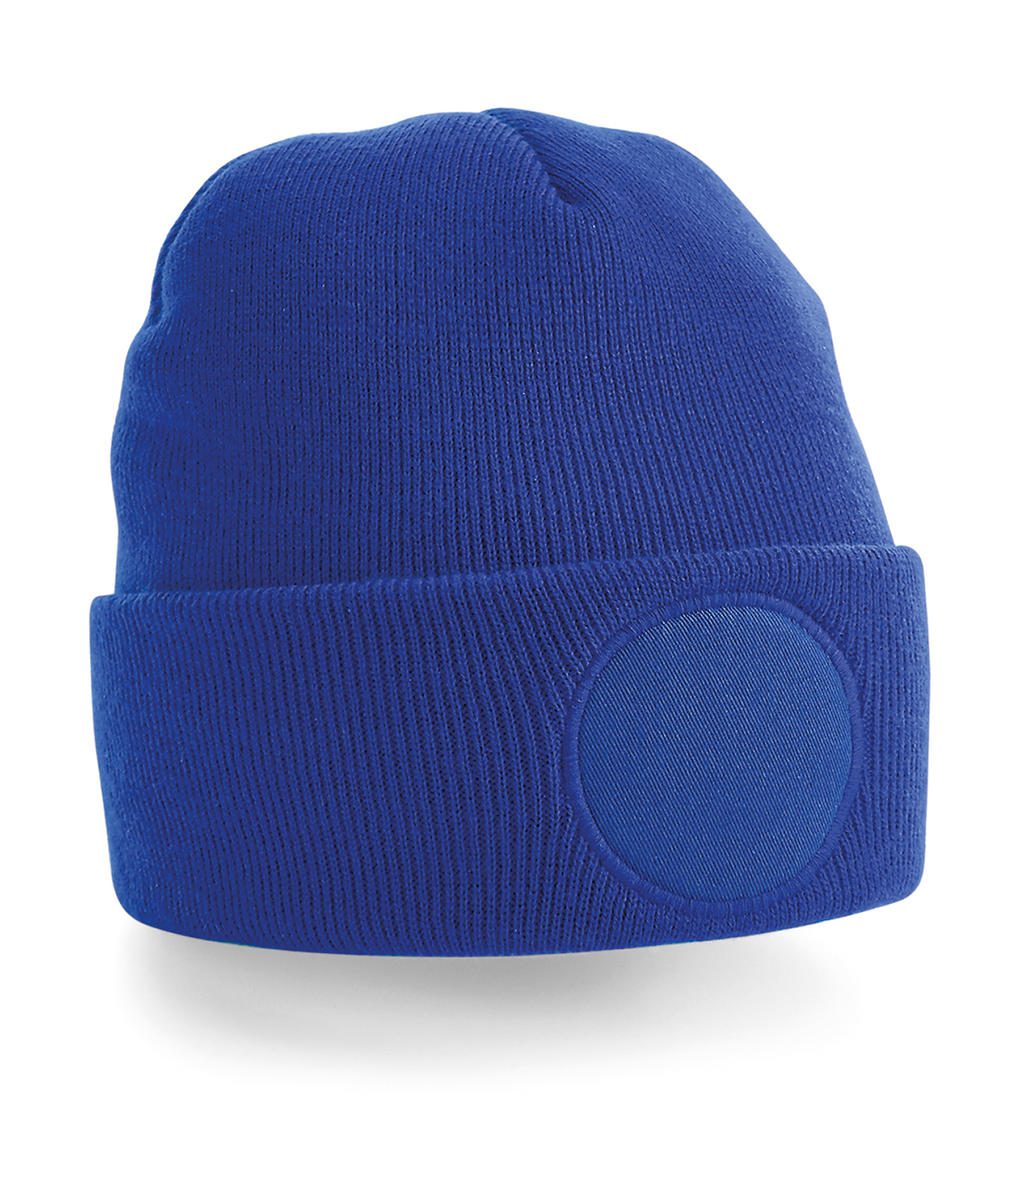  Circular Patch Beanie in Farbe Bright Royal